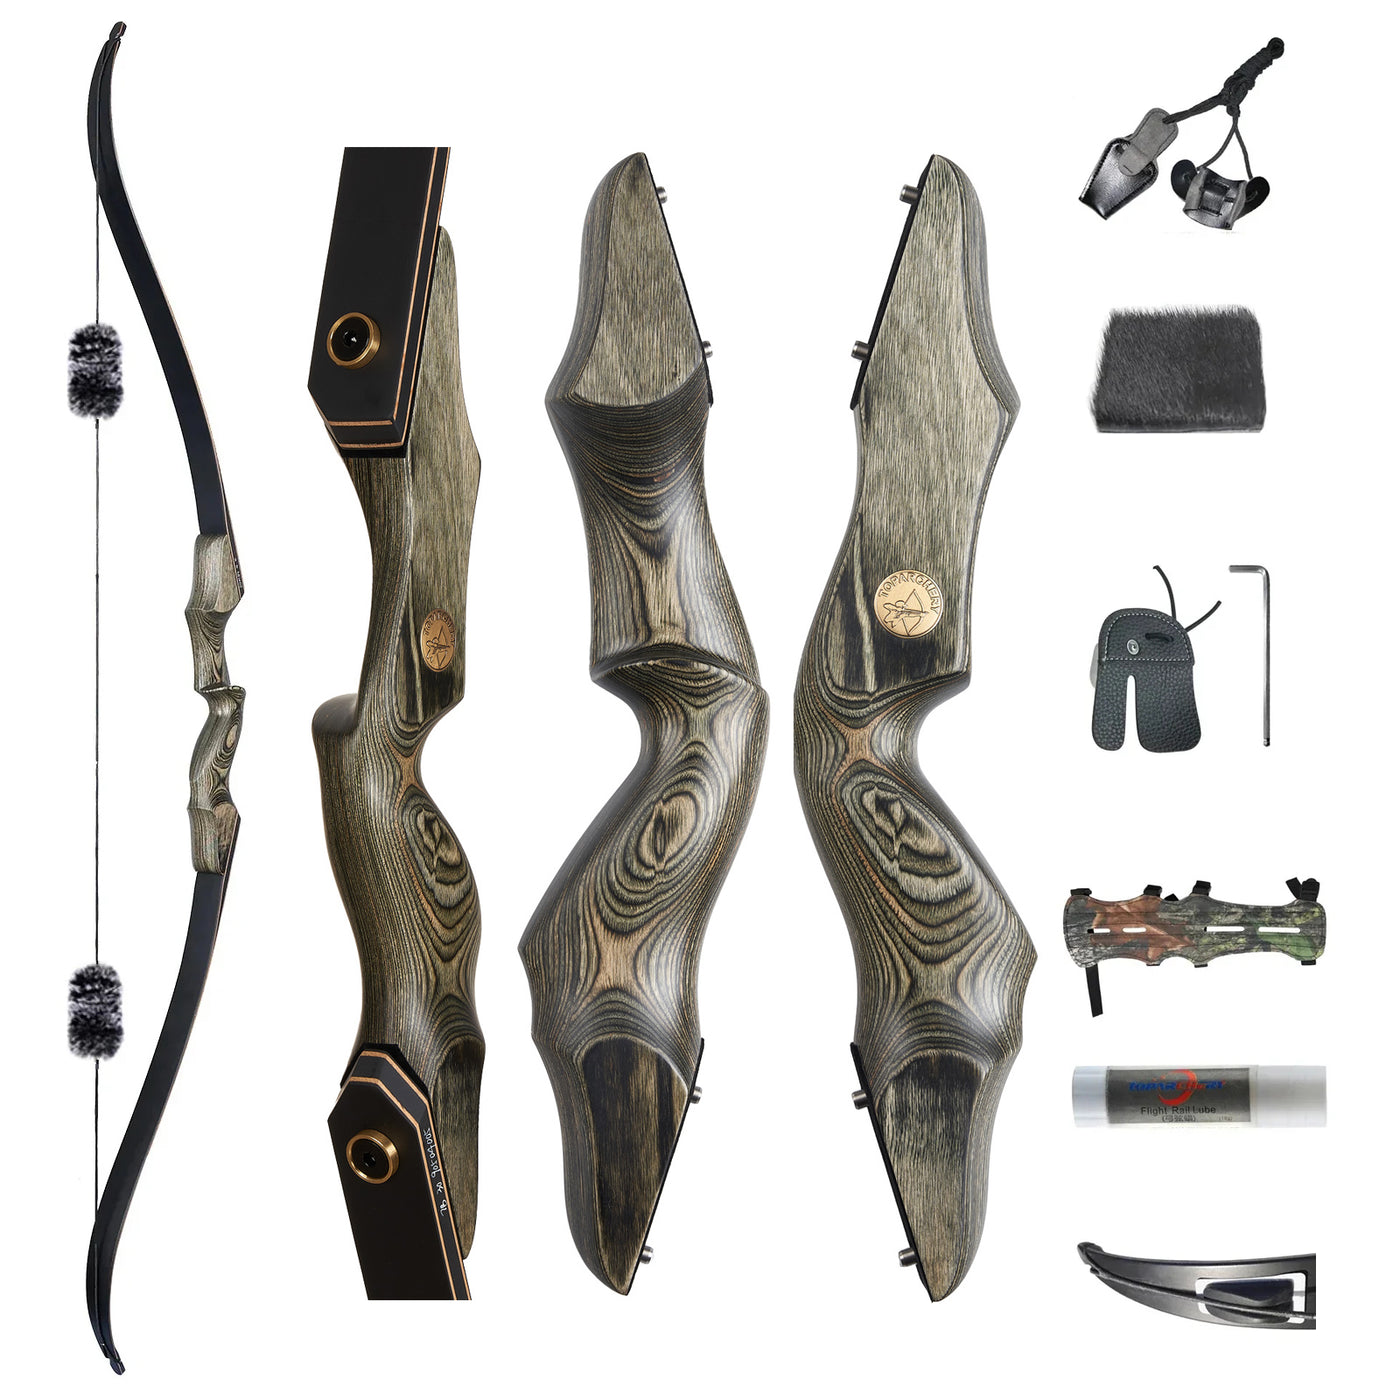 60 Wood Laminated Takedown Recurve Archery Bow Left Right Hand